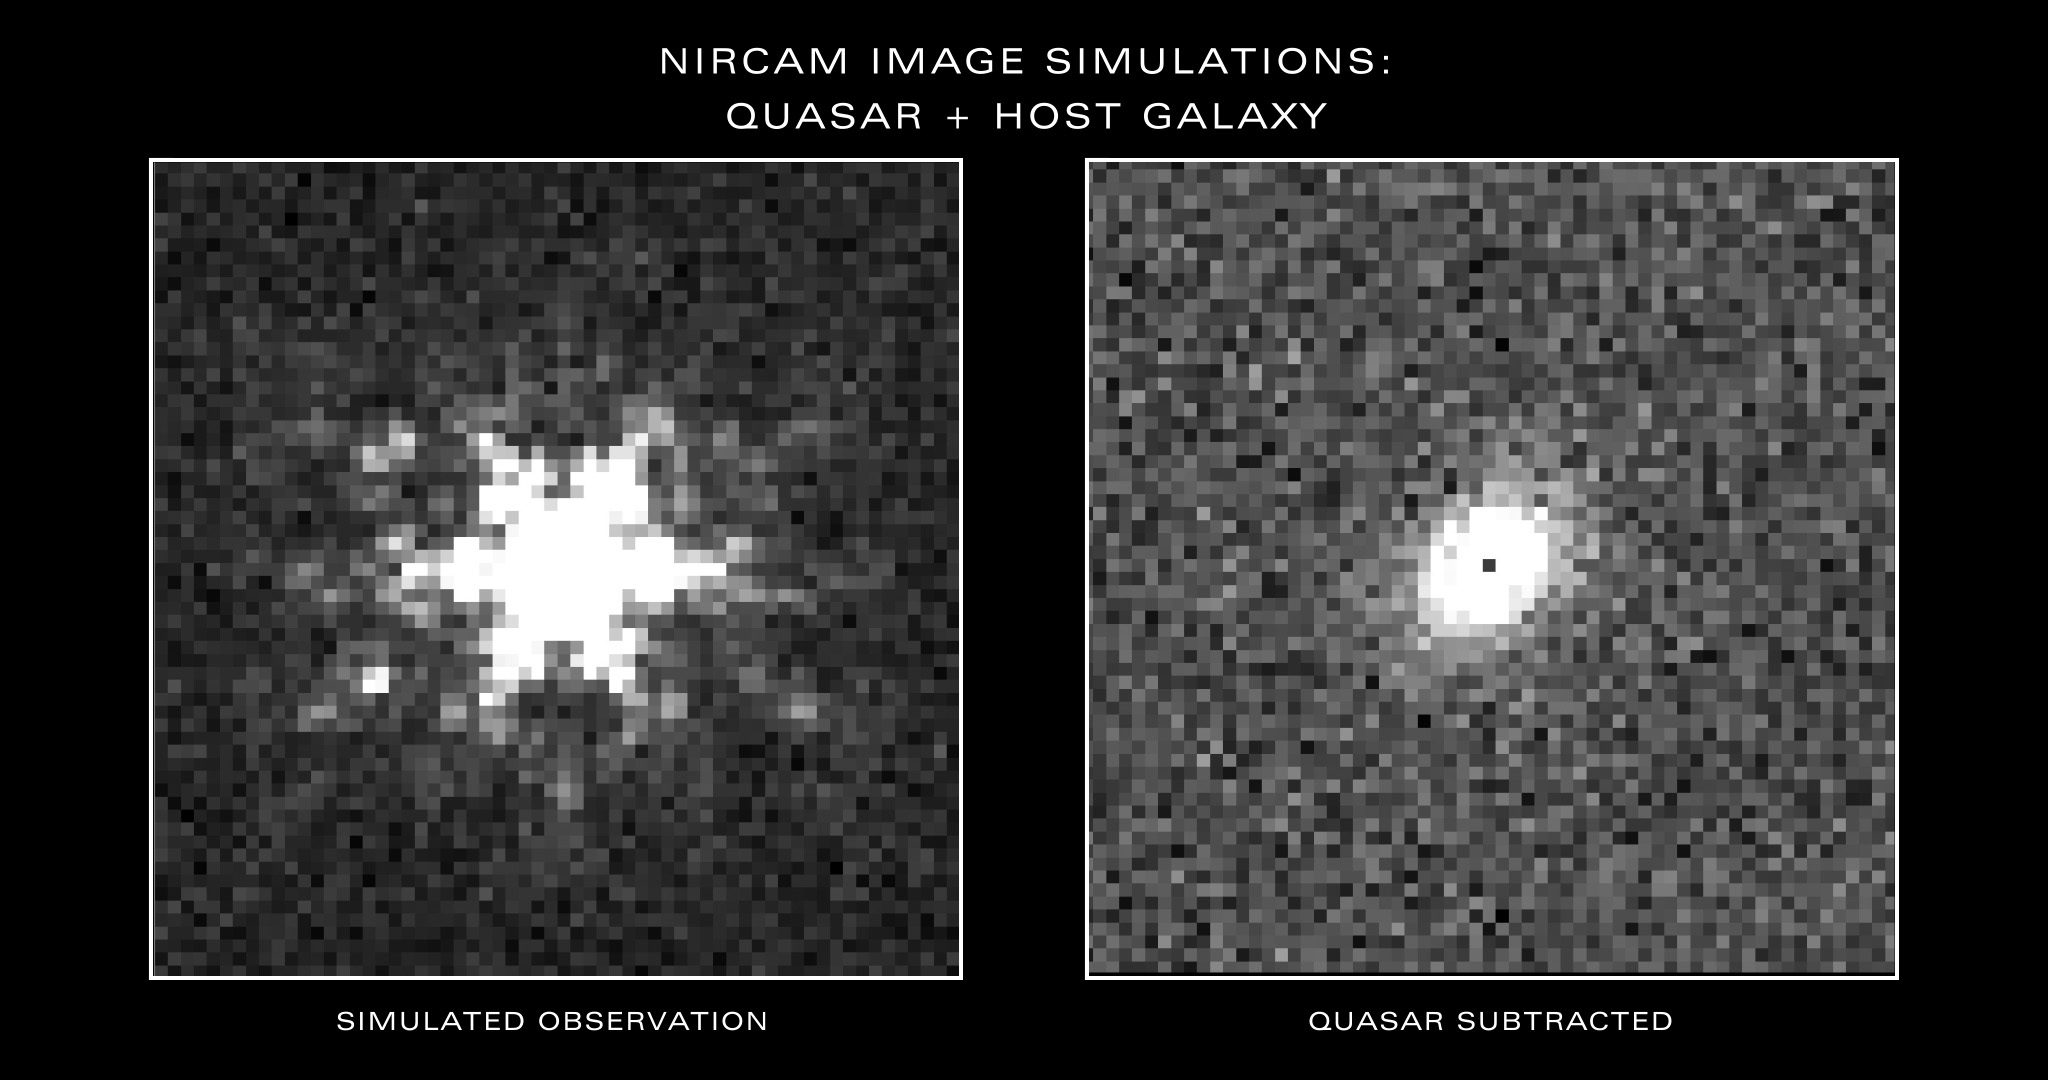 two black and white images illustrating a quasar